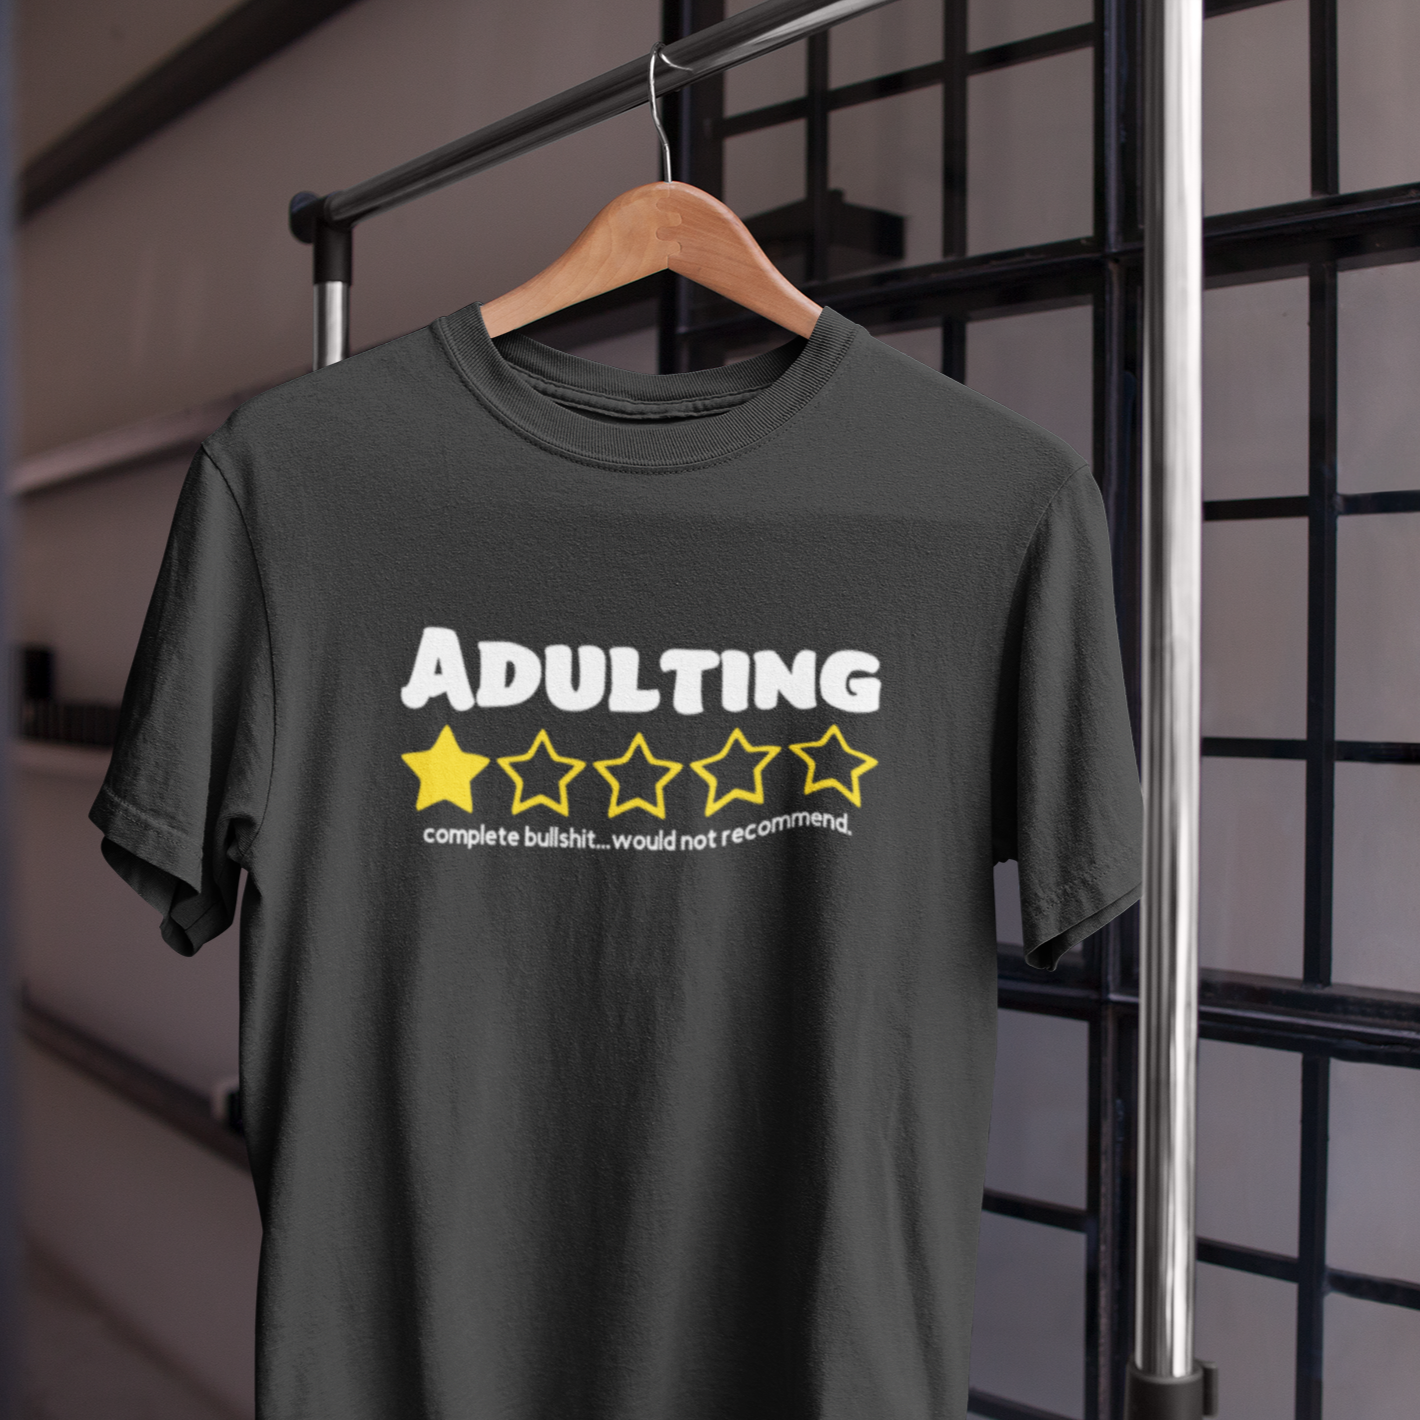 Charcoal Teeshirt with Adulting 1 star complete bullshit would not recommend on the front